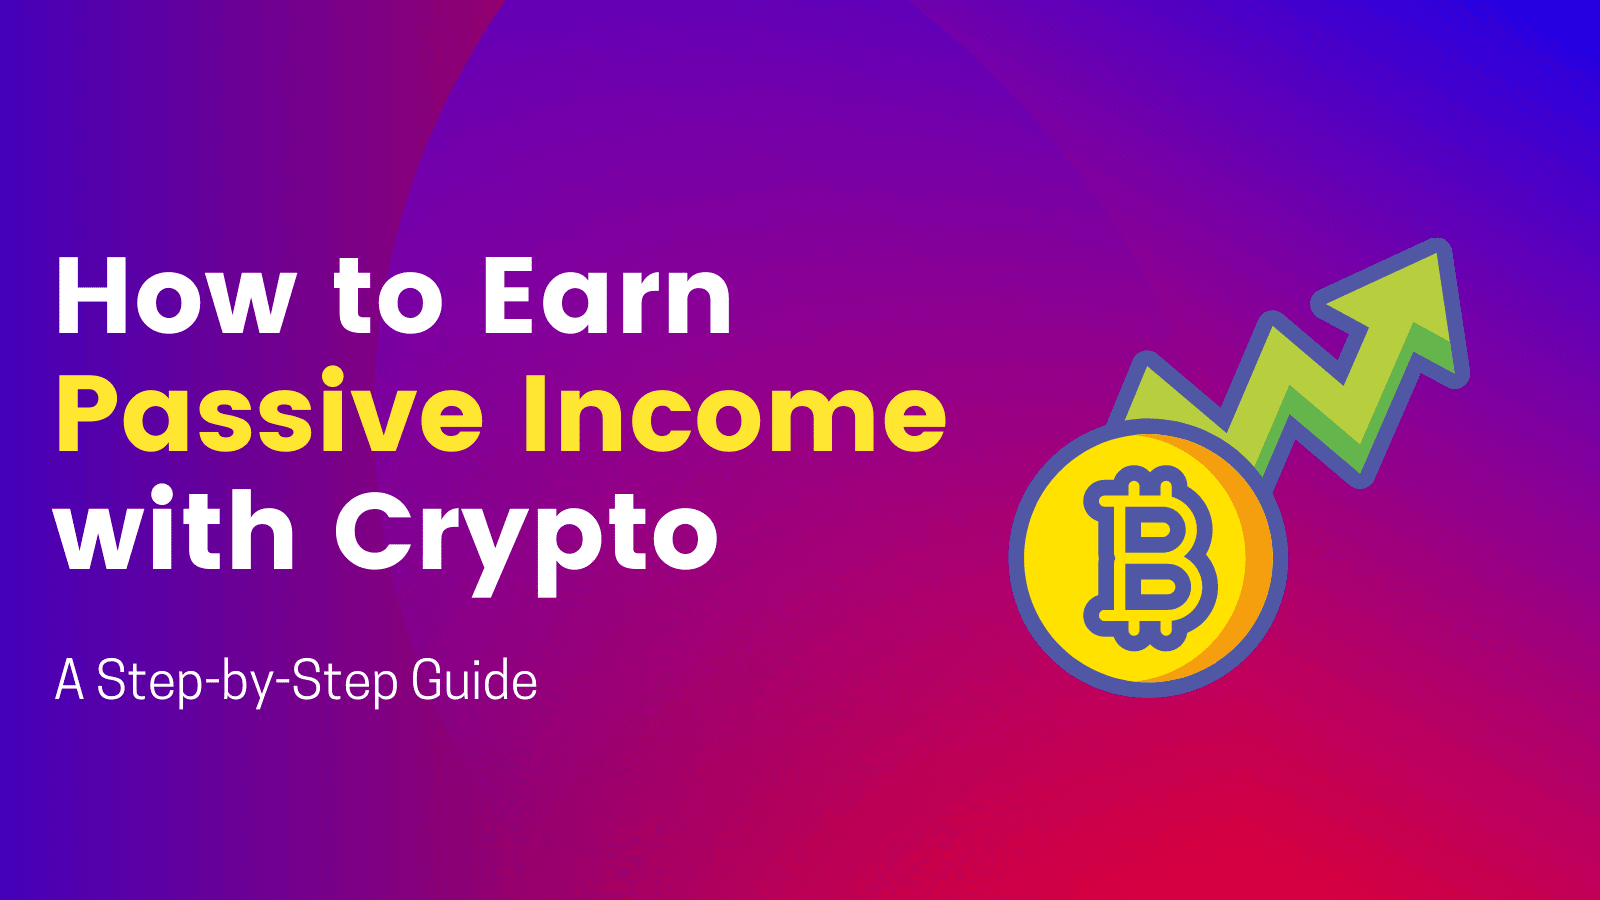 How to Earn Passive Income with Crypto - A Step-by-Step Guide